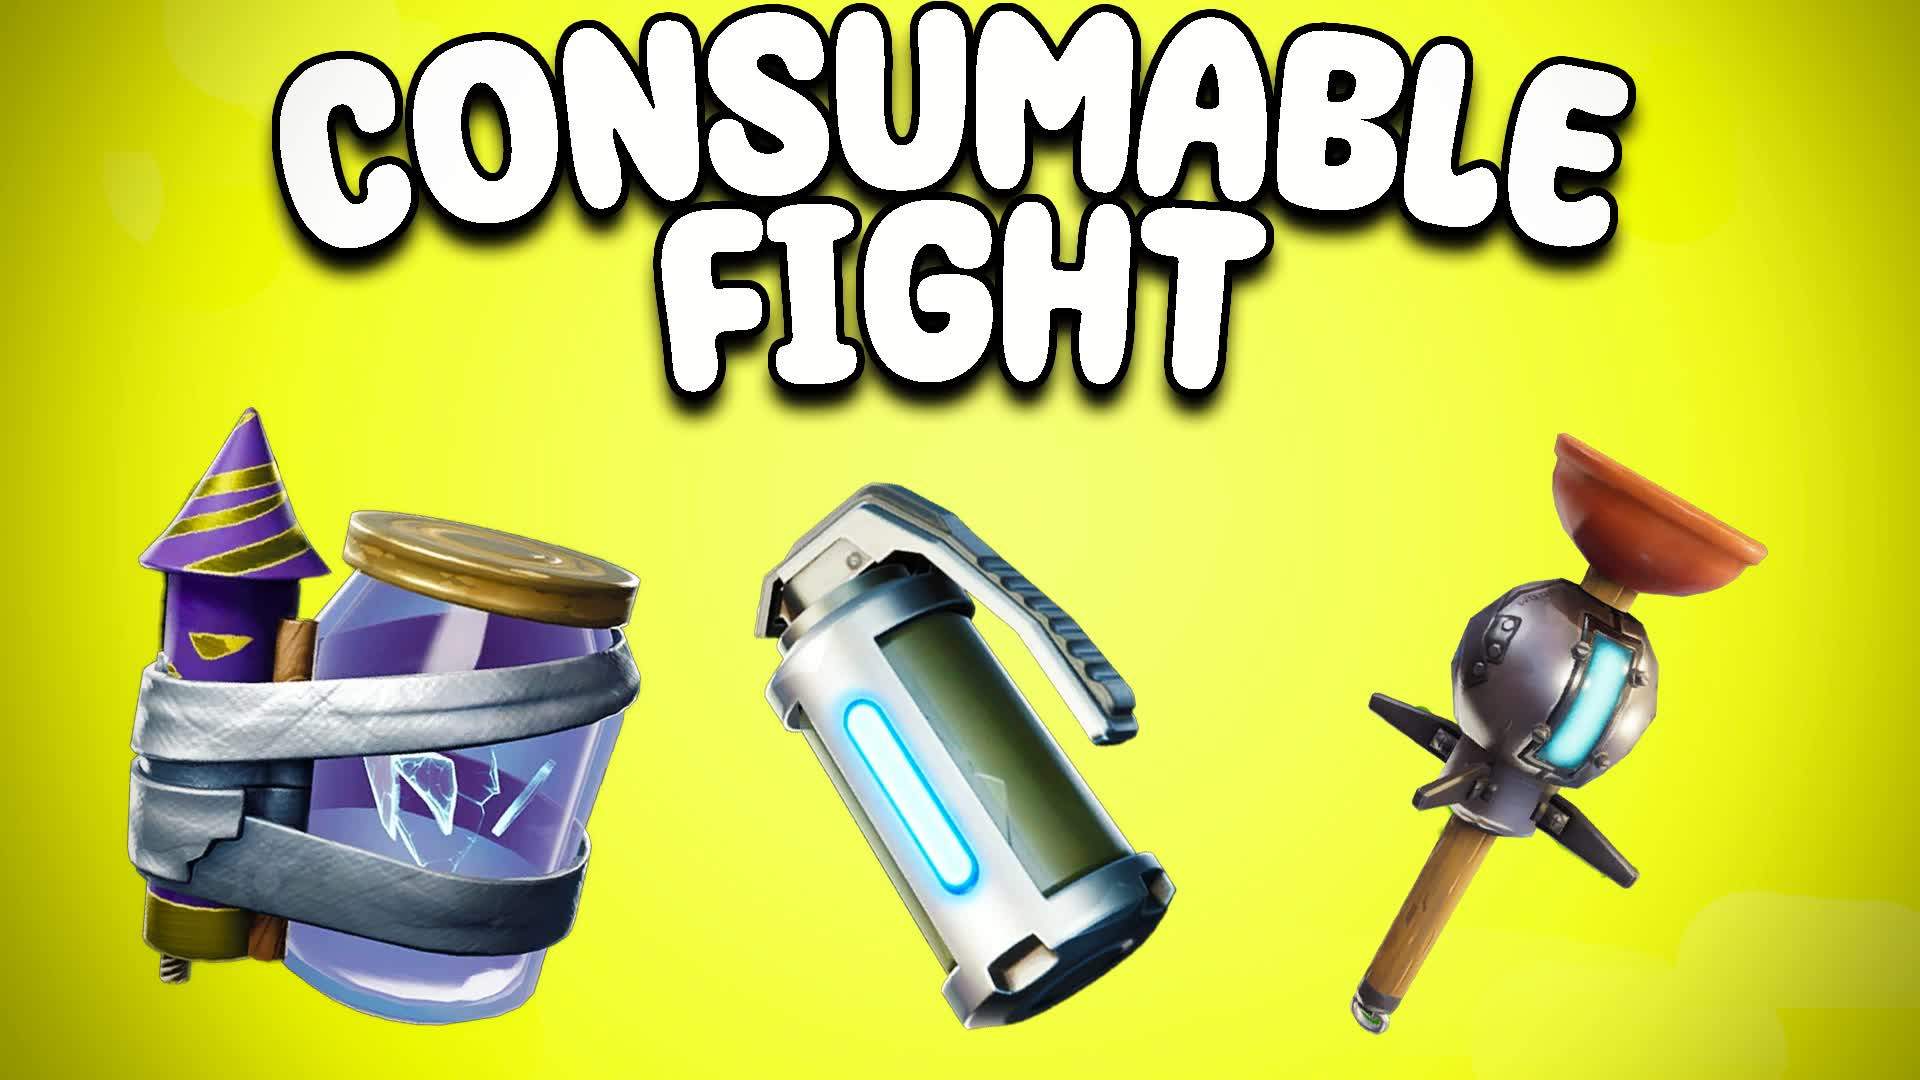 Consumable Fight